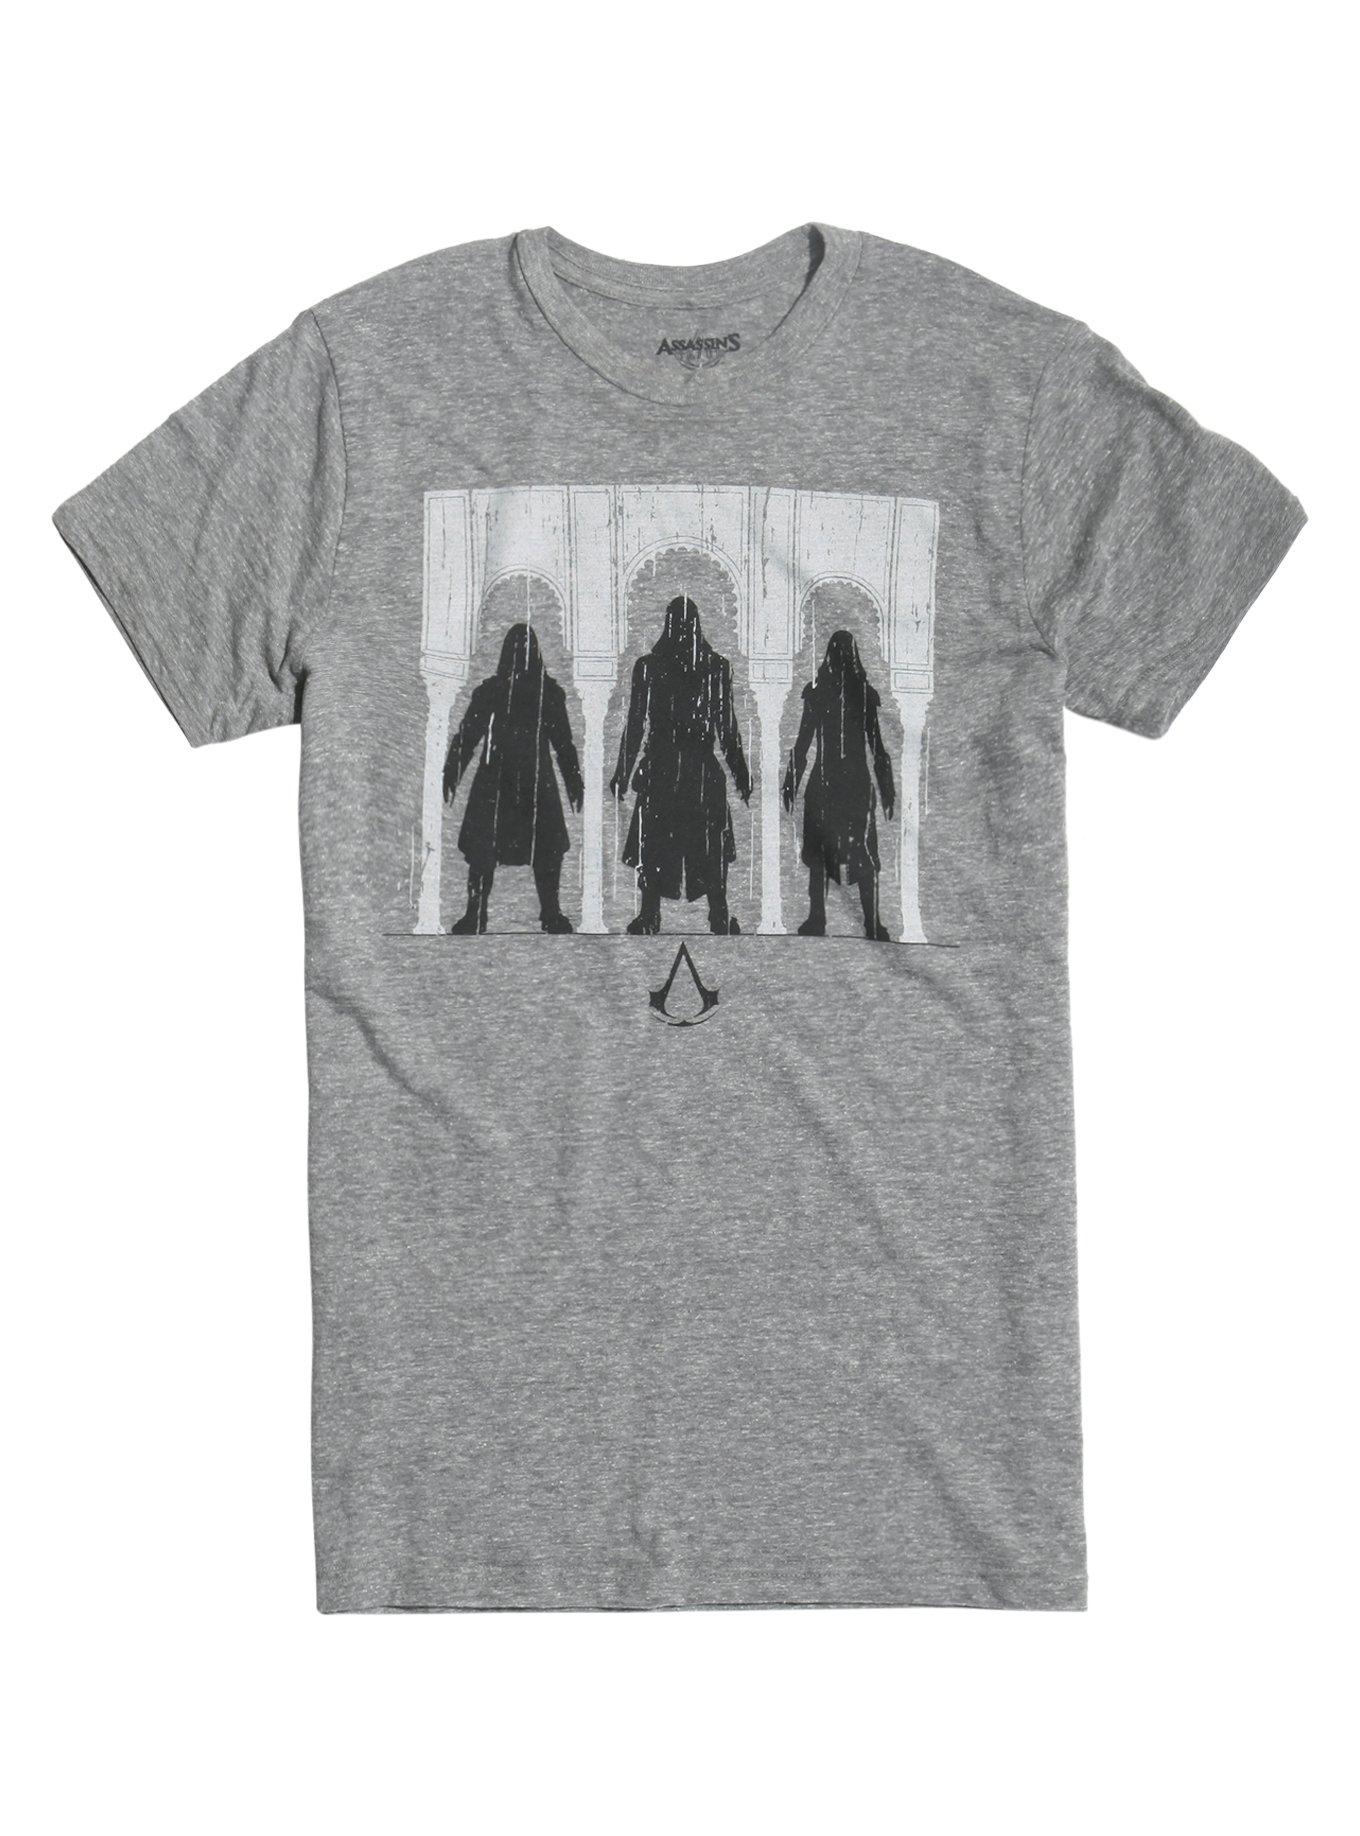 Assassin's Creed Silhouette Trio T-Shirt, GREY, hi-res